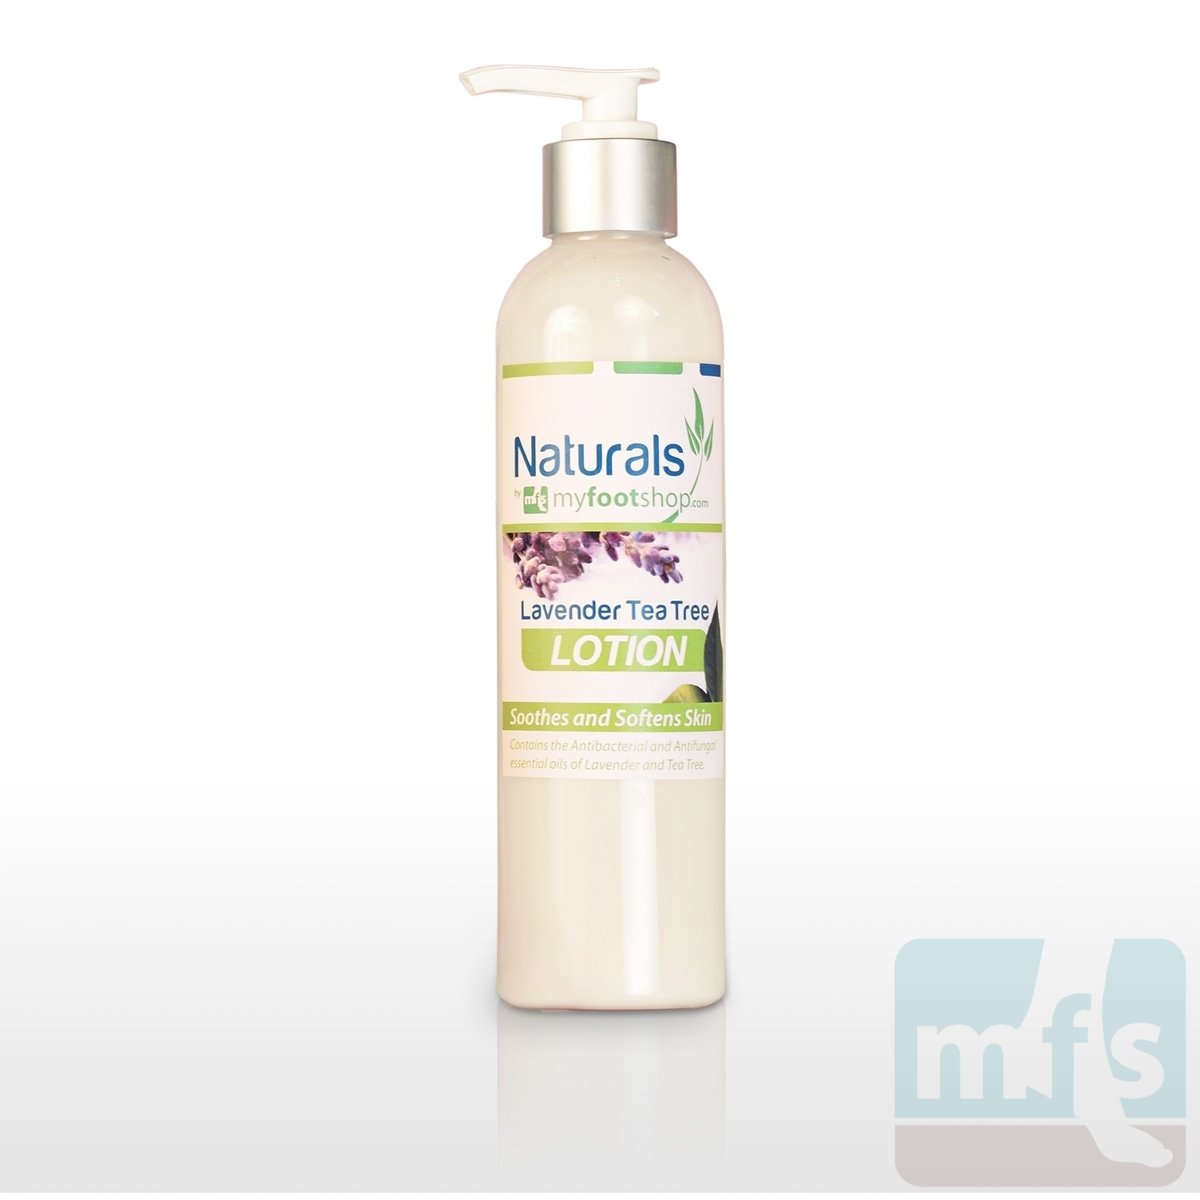 Natural Tea Tree and Lavender Lotion